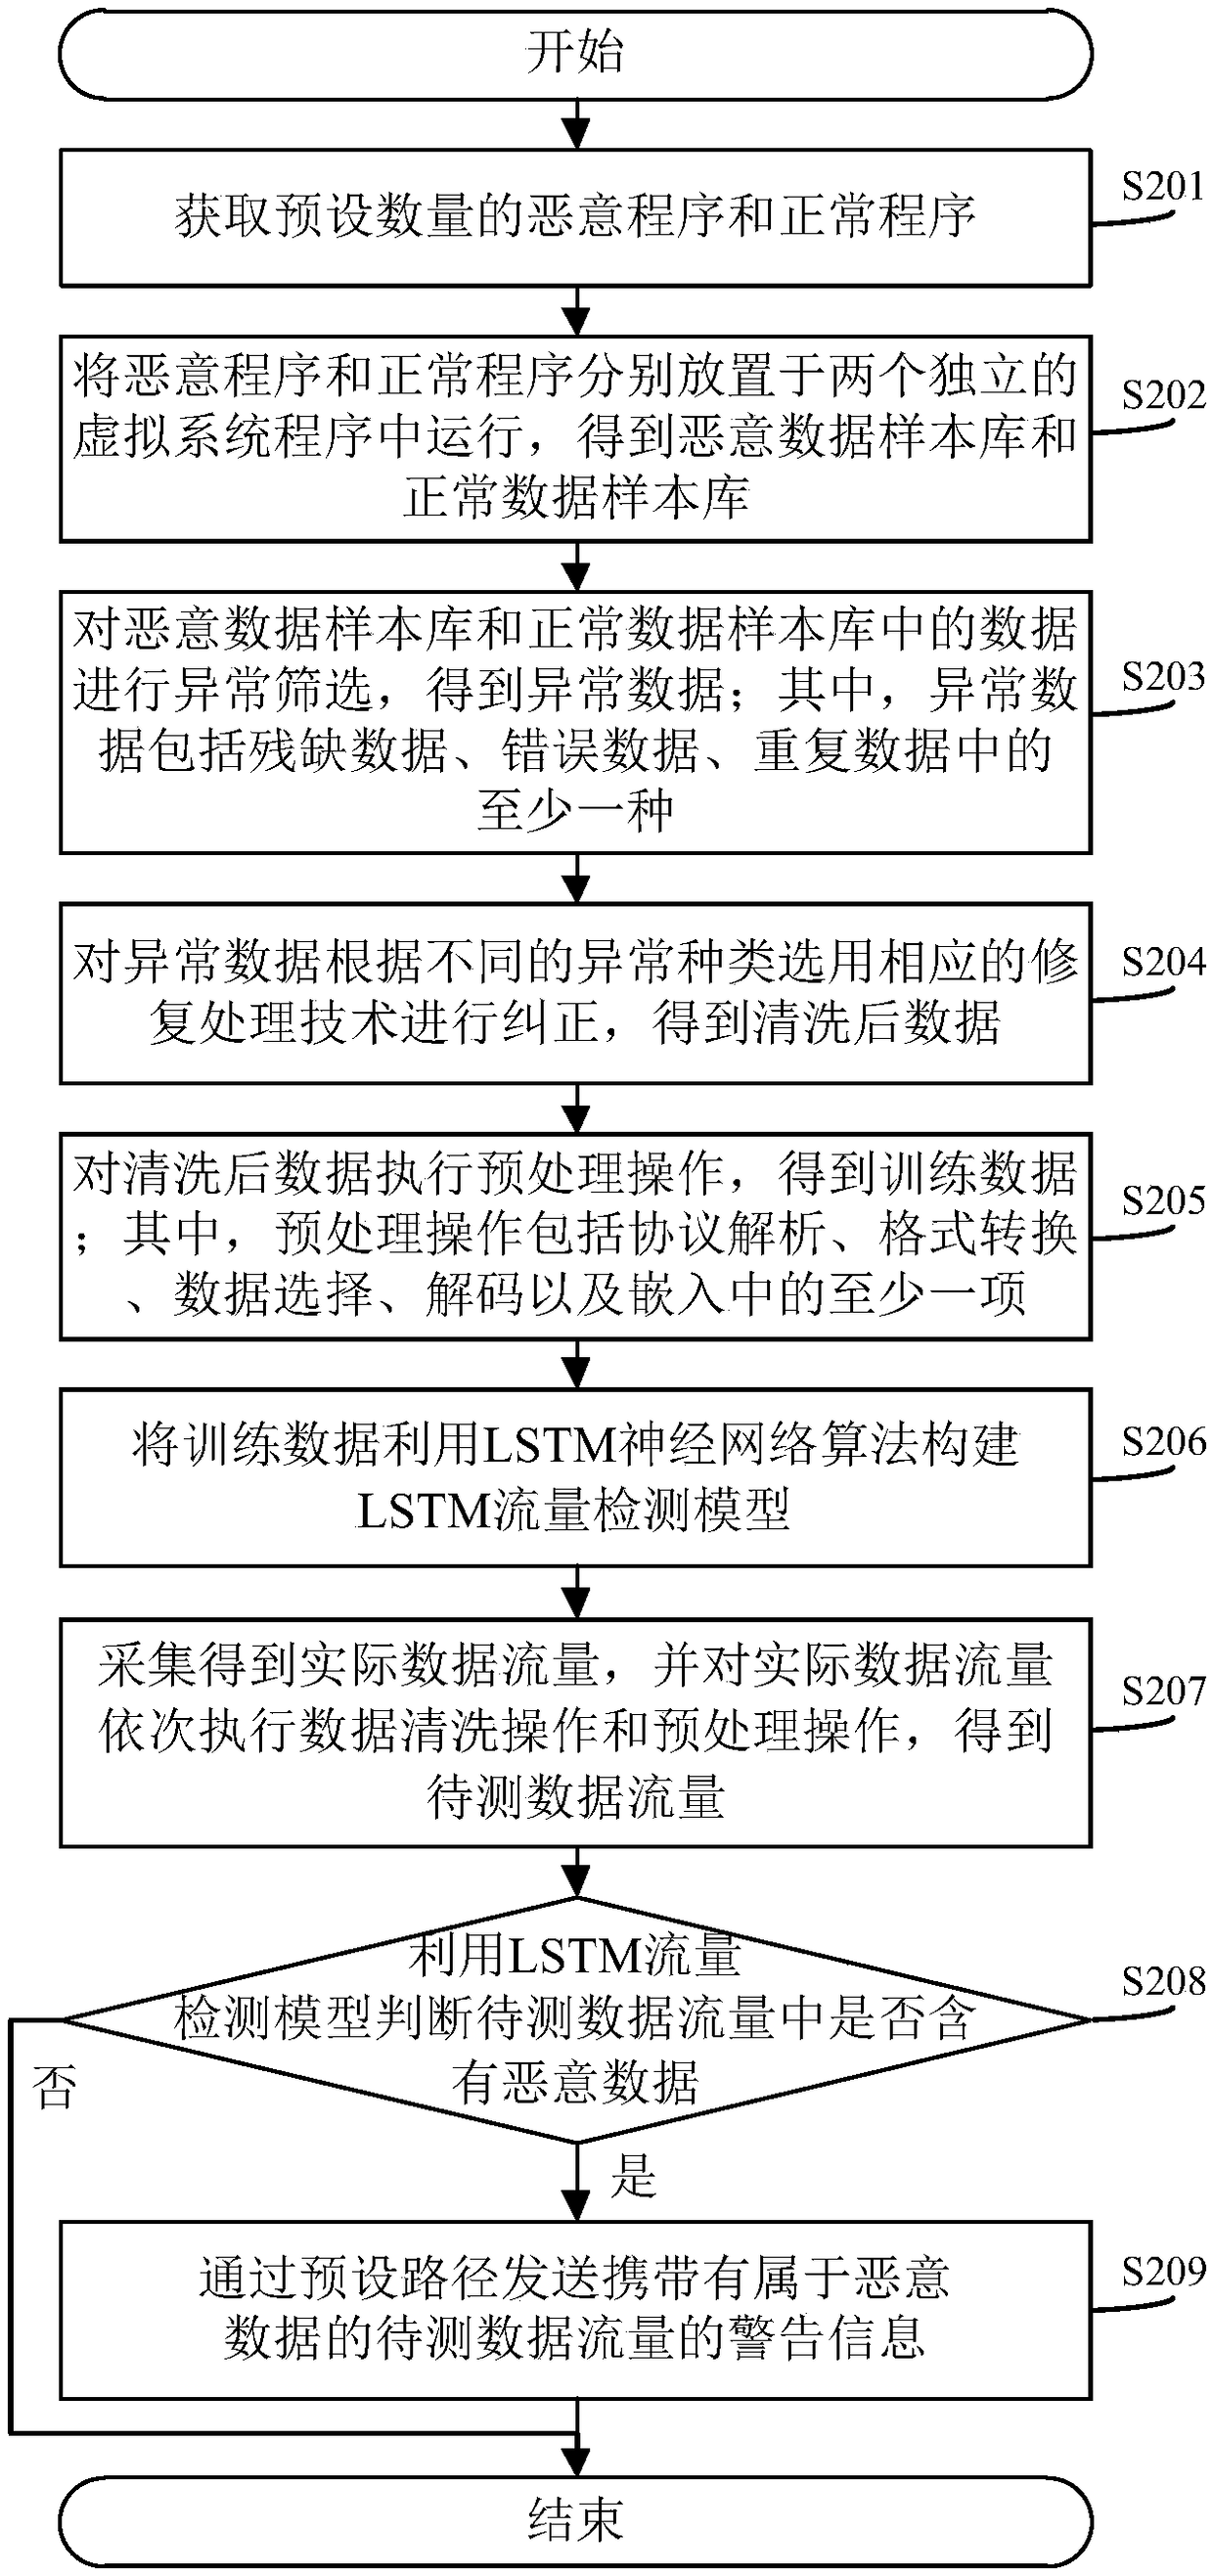 Malicious traffic detection method, system and apparatus, and computer readable storage medium